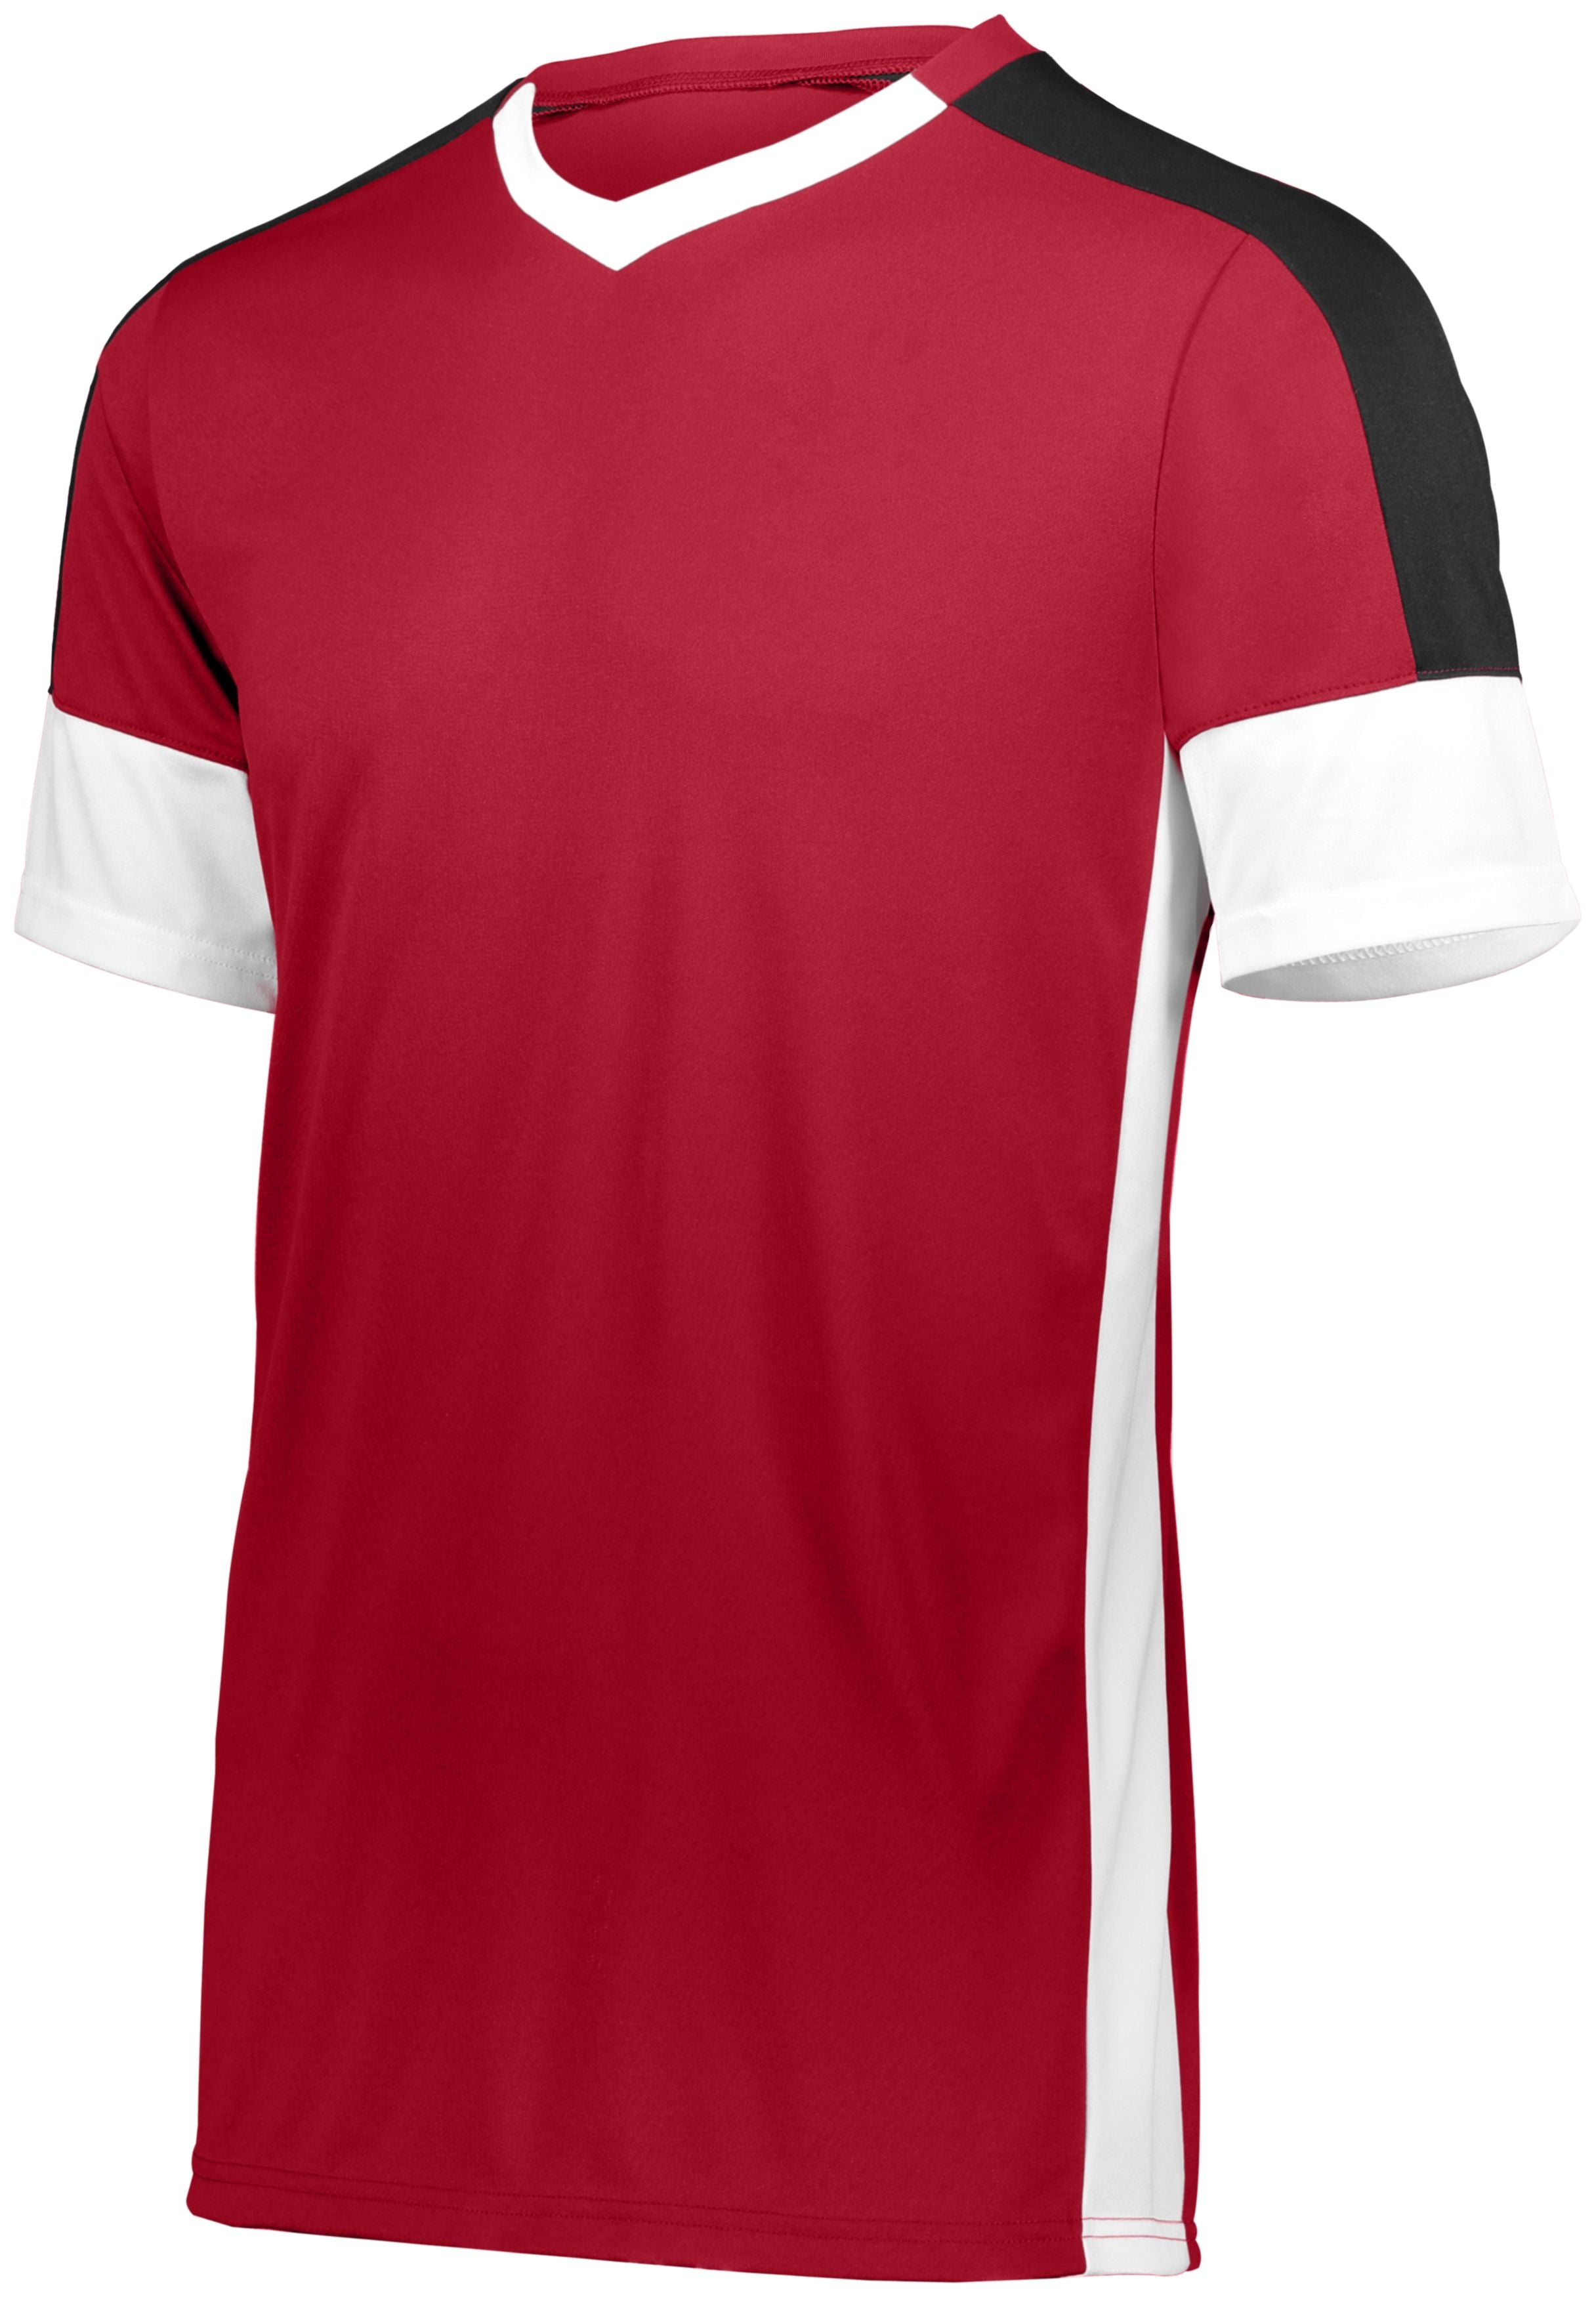 High 5 Youth Wembley Soccer Jersey in Scarlet/White/Black  -Part of the Youth, Youth-Jersey, High5-Products, Soccer, Shirts, All-Sports-1 product lines at KanaleyCreations.com